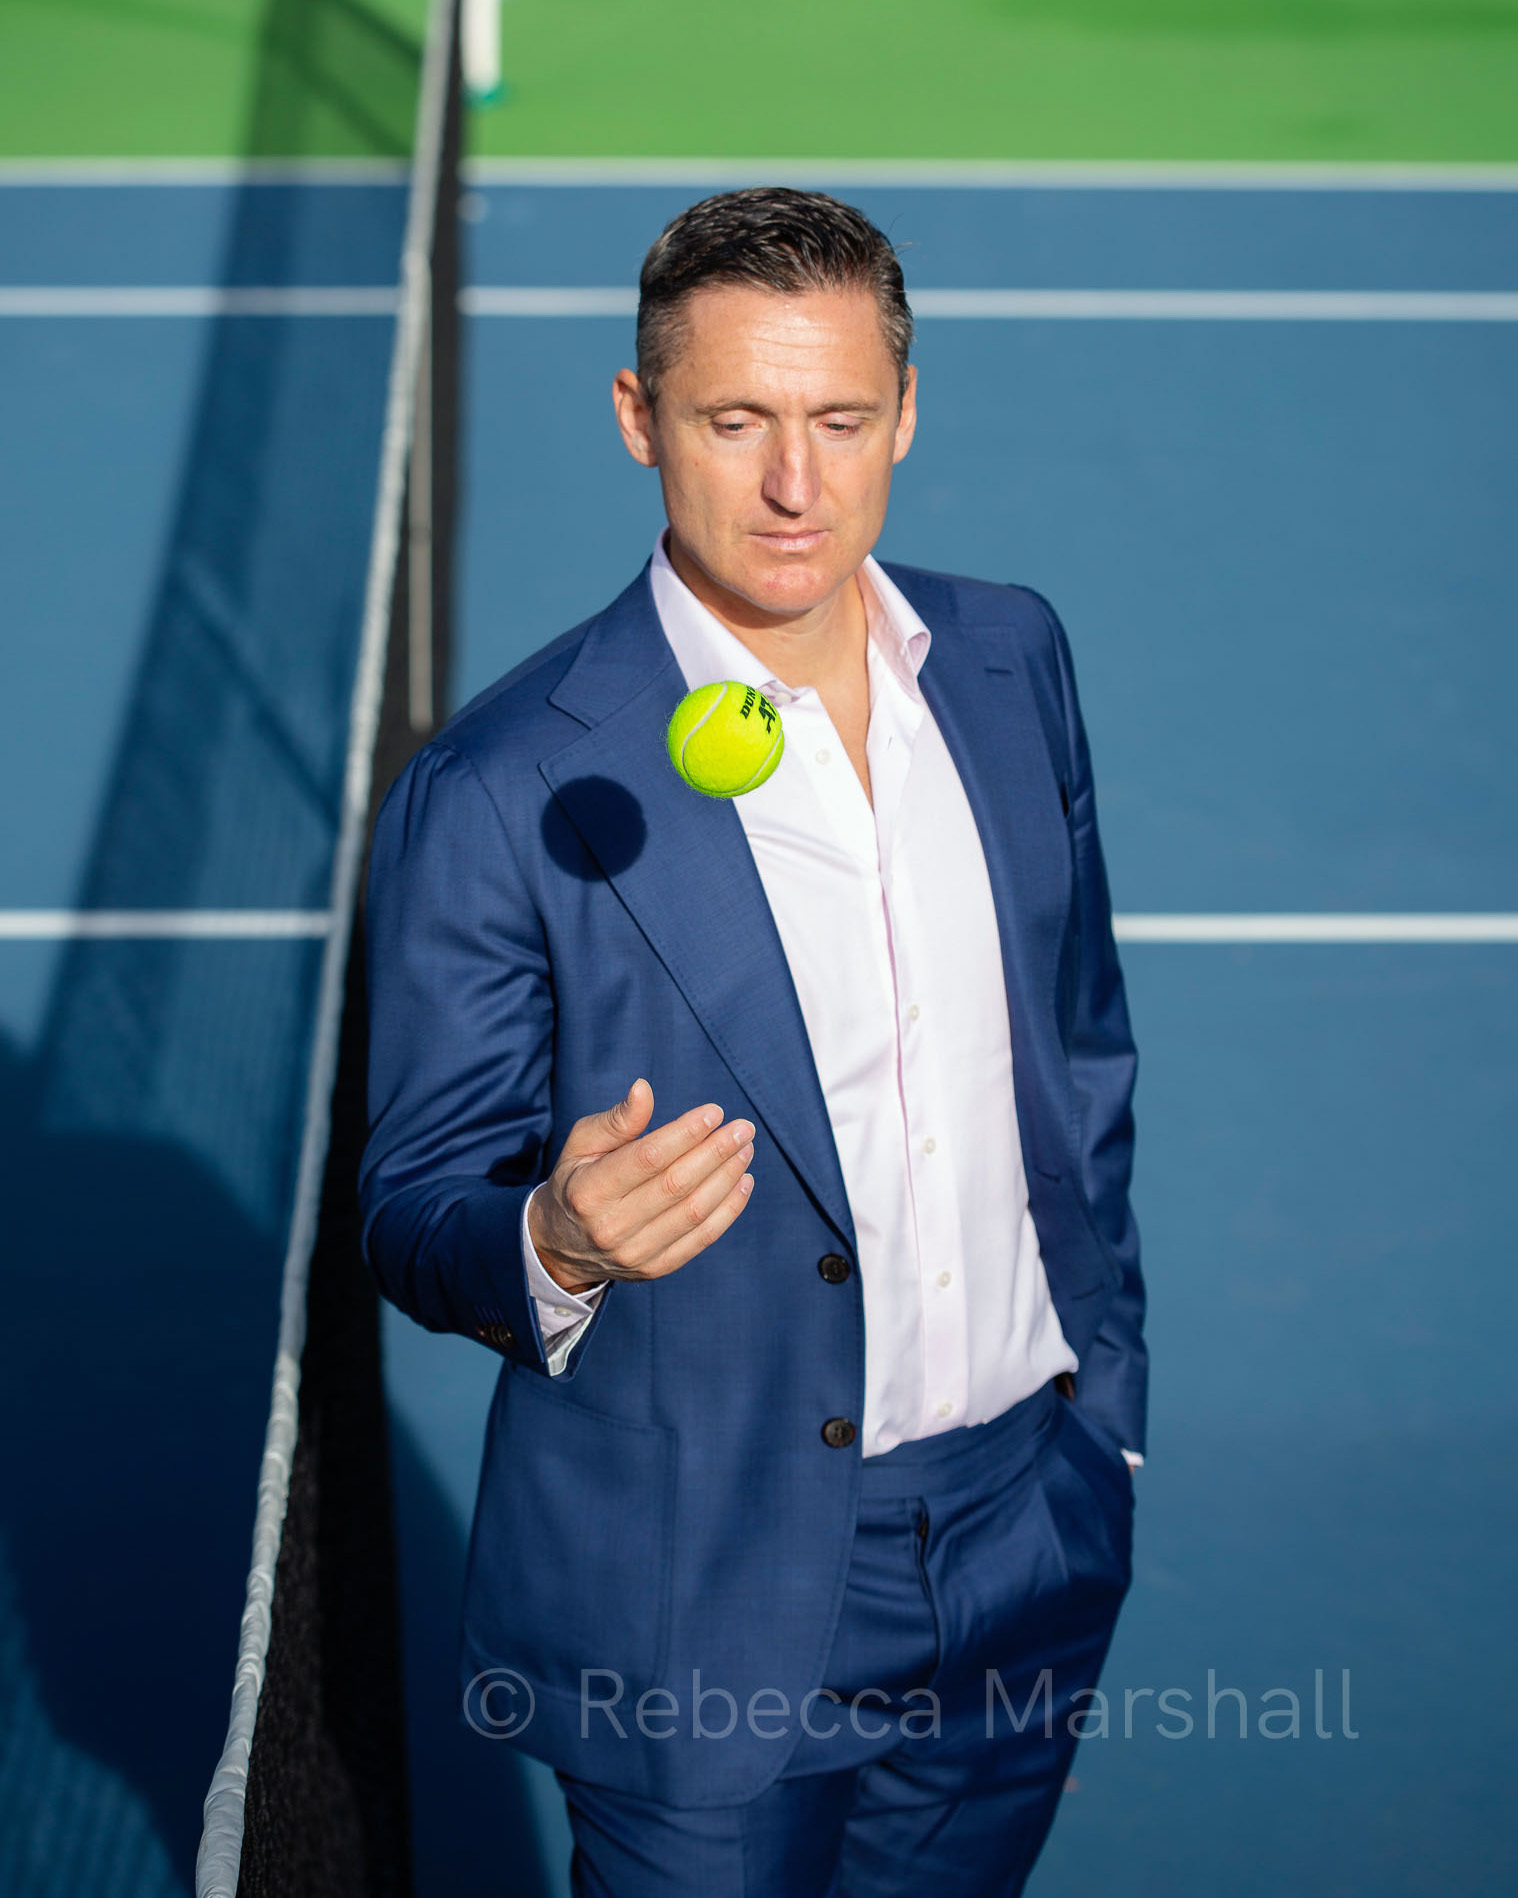 Photograph of Andrea Gaudenzi in a suit throwing a tennis ball on a tennis court